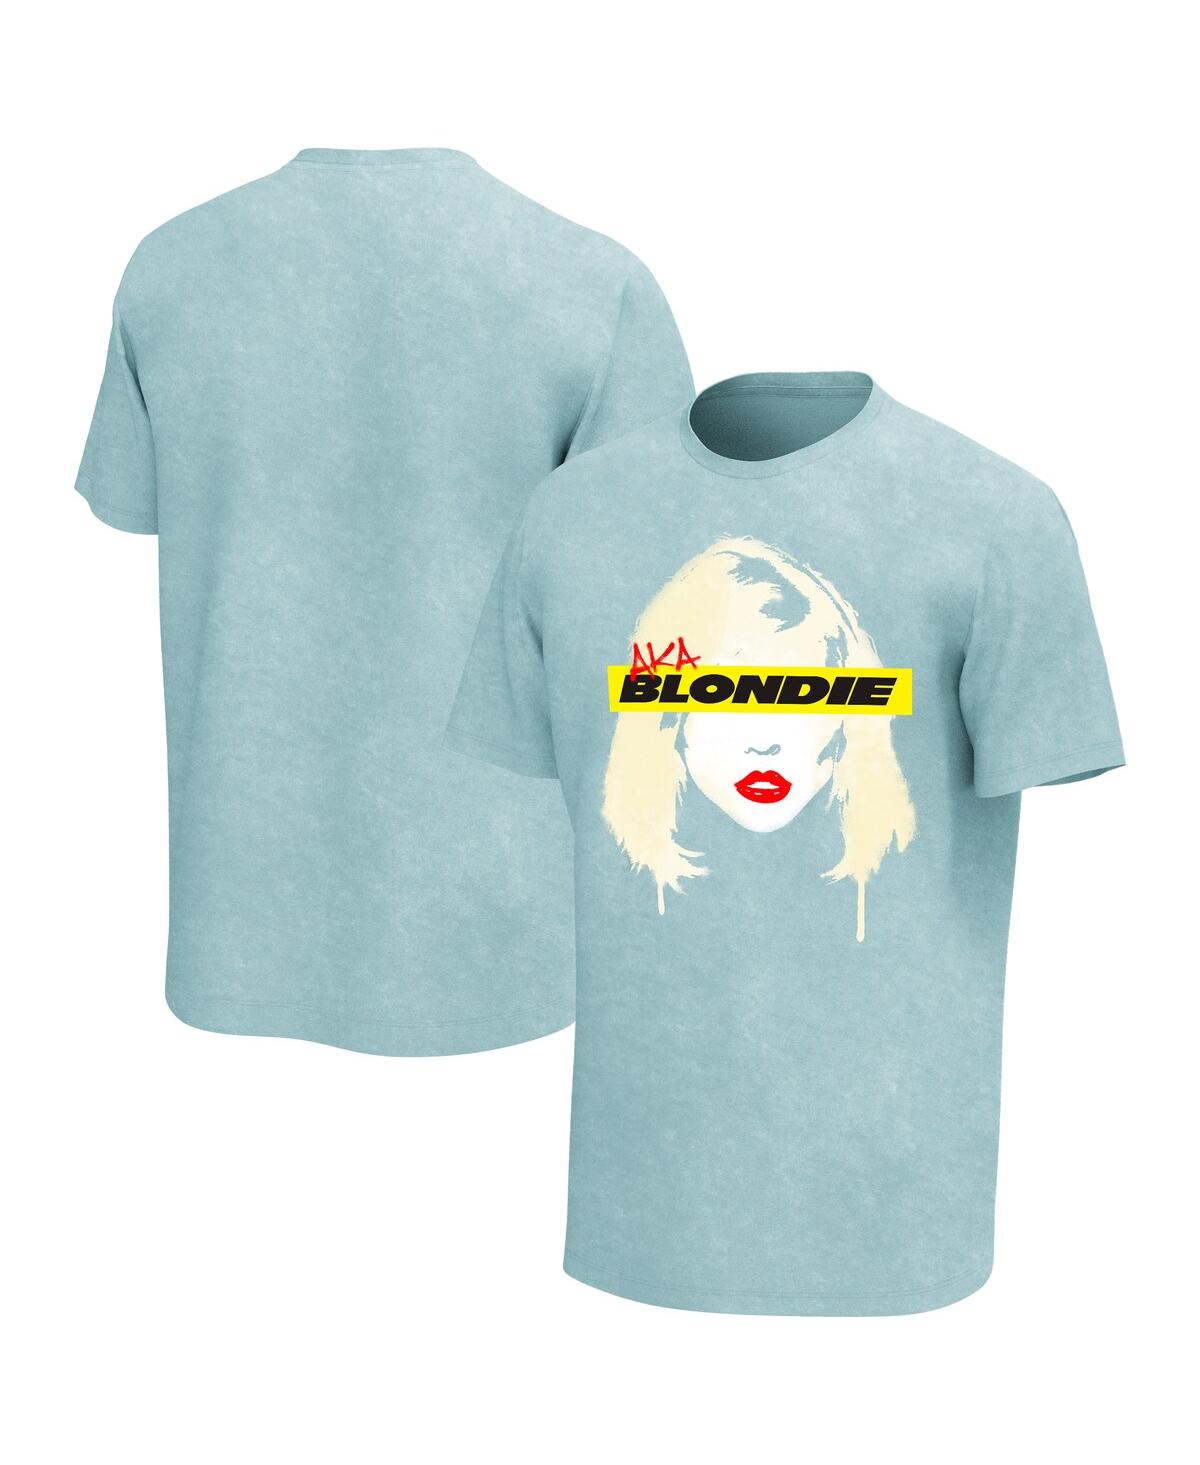 Men's Light Green Distressed Blondie Spray Washed Graphic T-shirt - Light Green